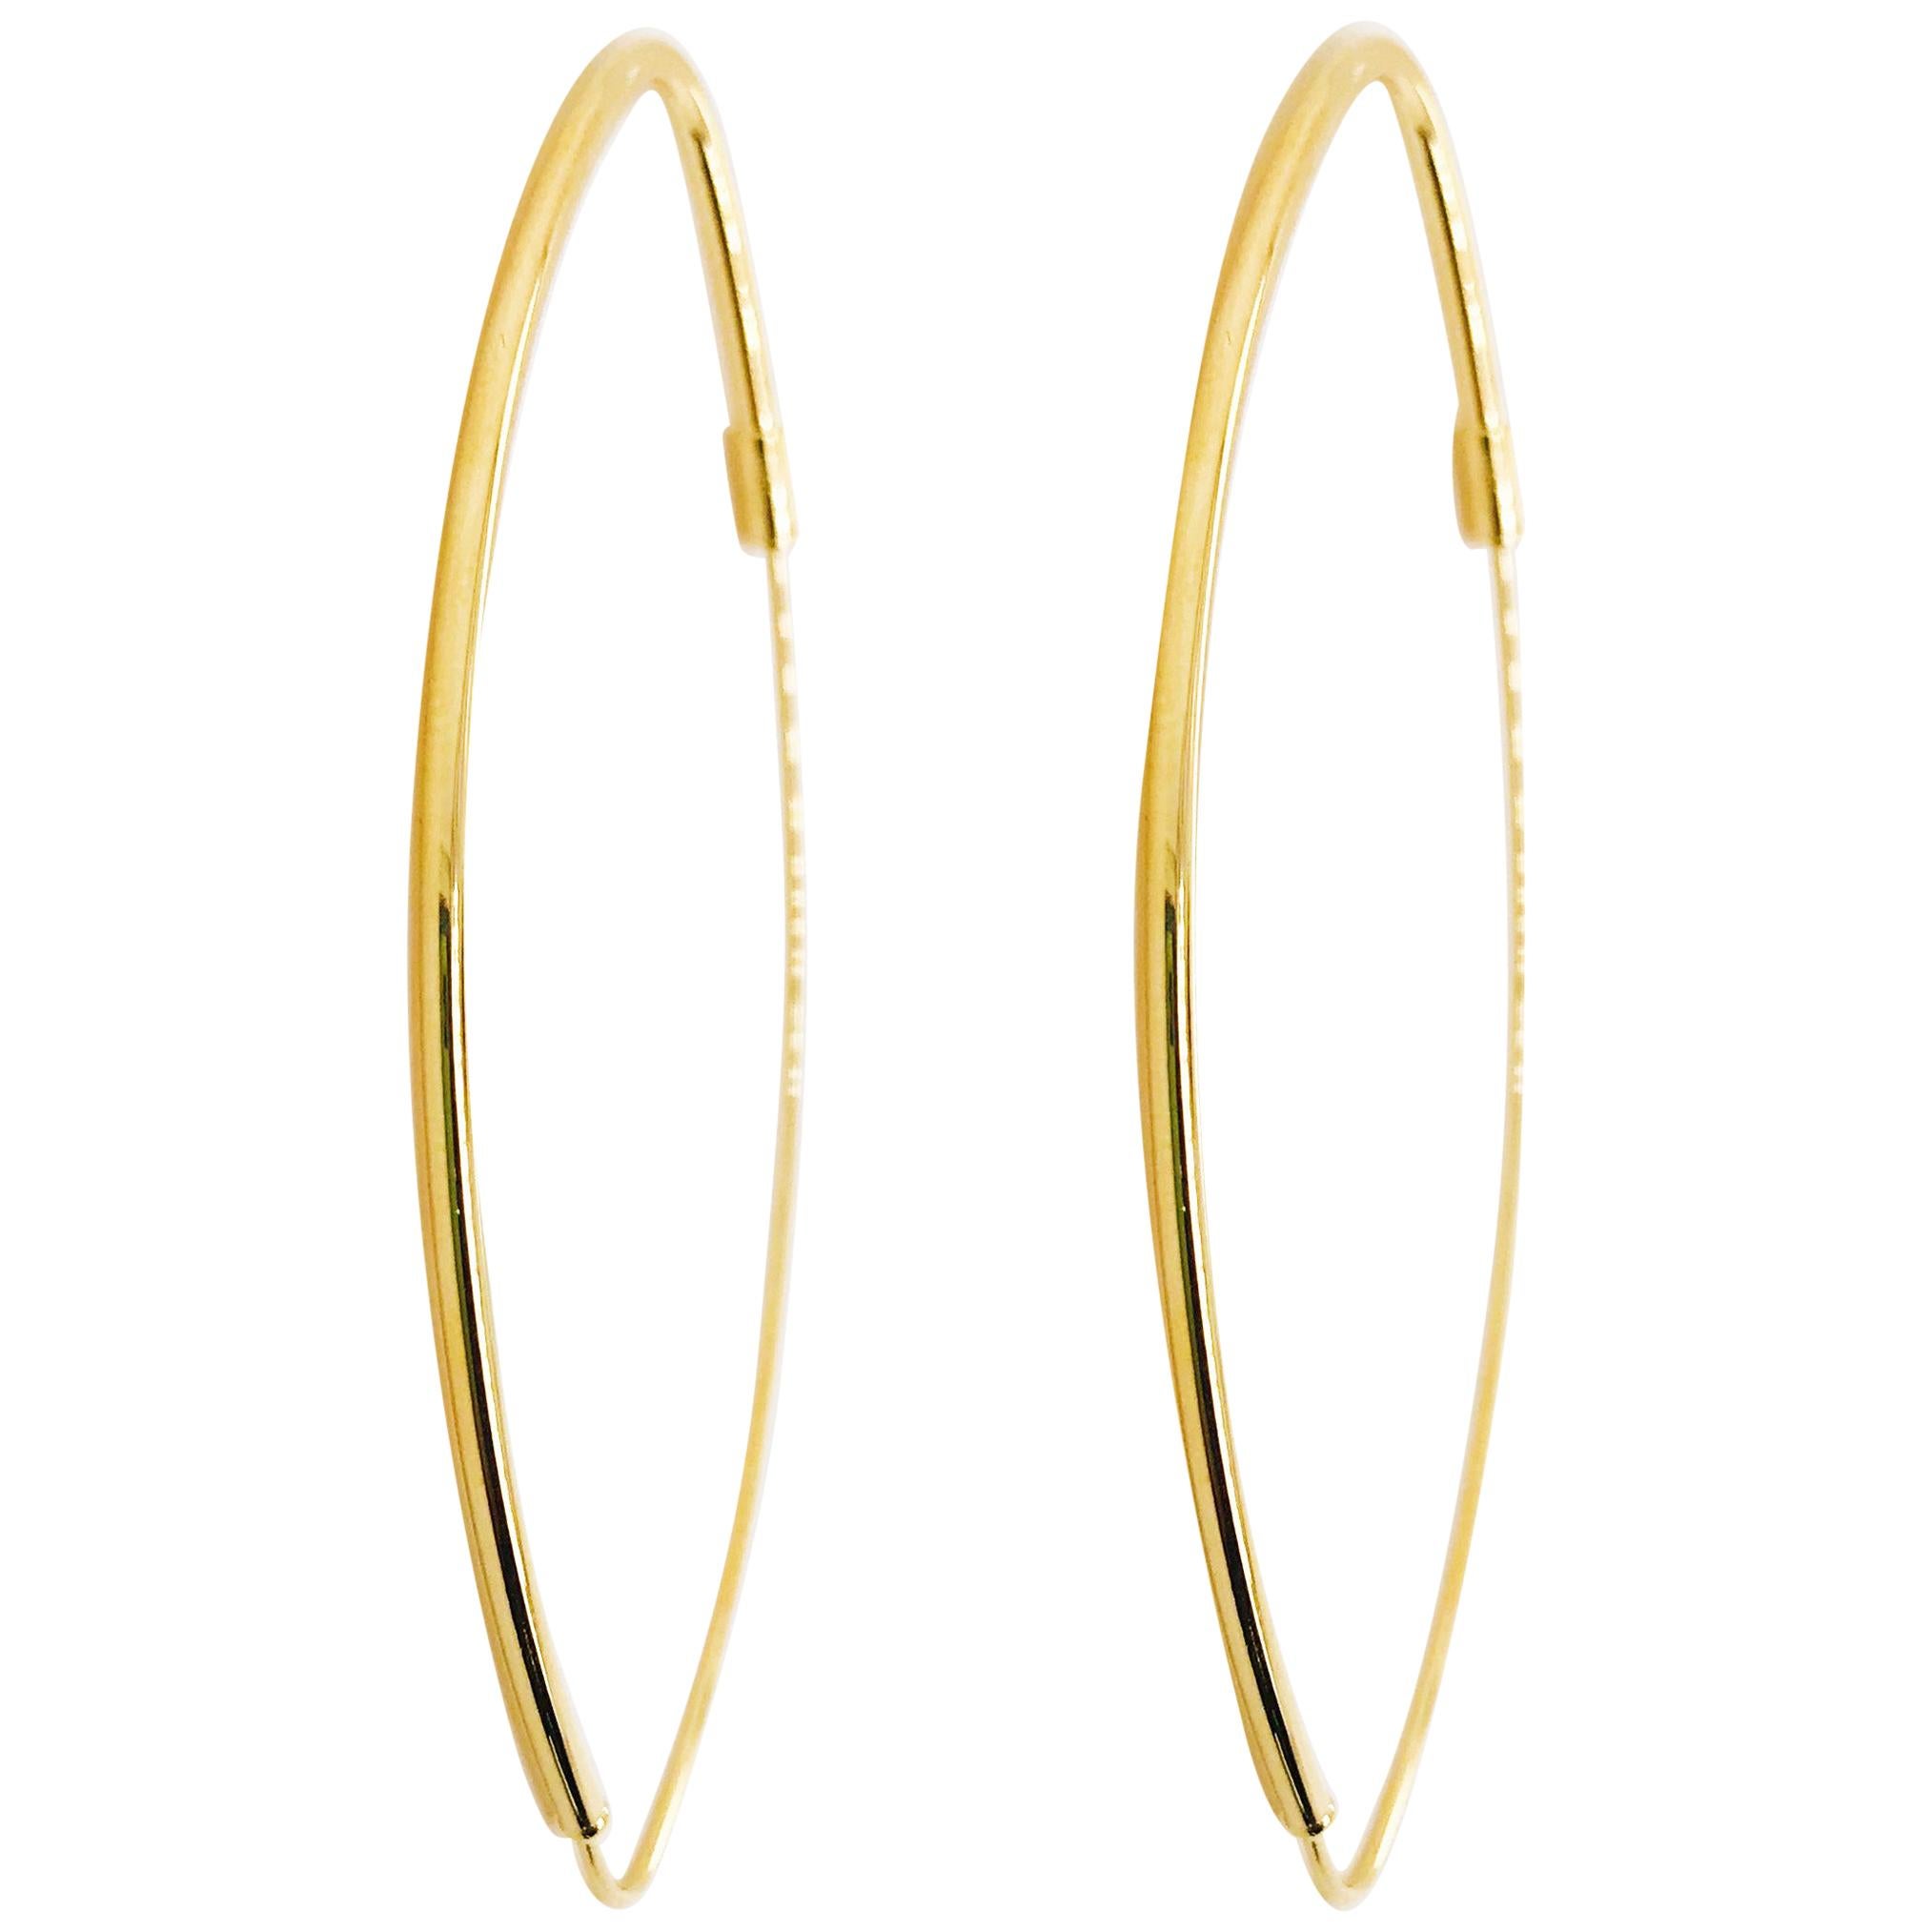 Gold Oval Hoop Earrings 14 Karat Yellow Gold Thin Oval Hoops For 